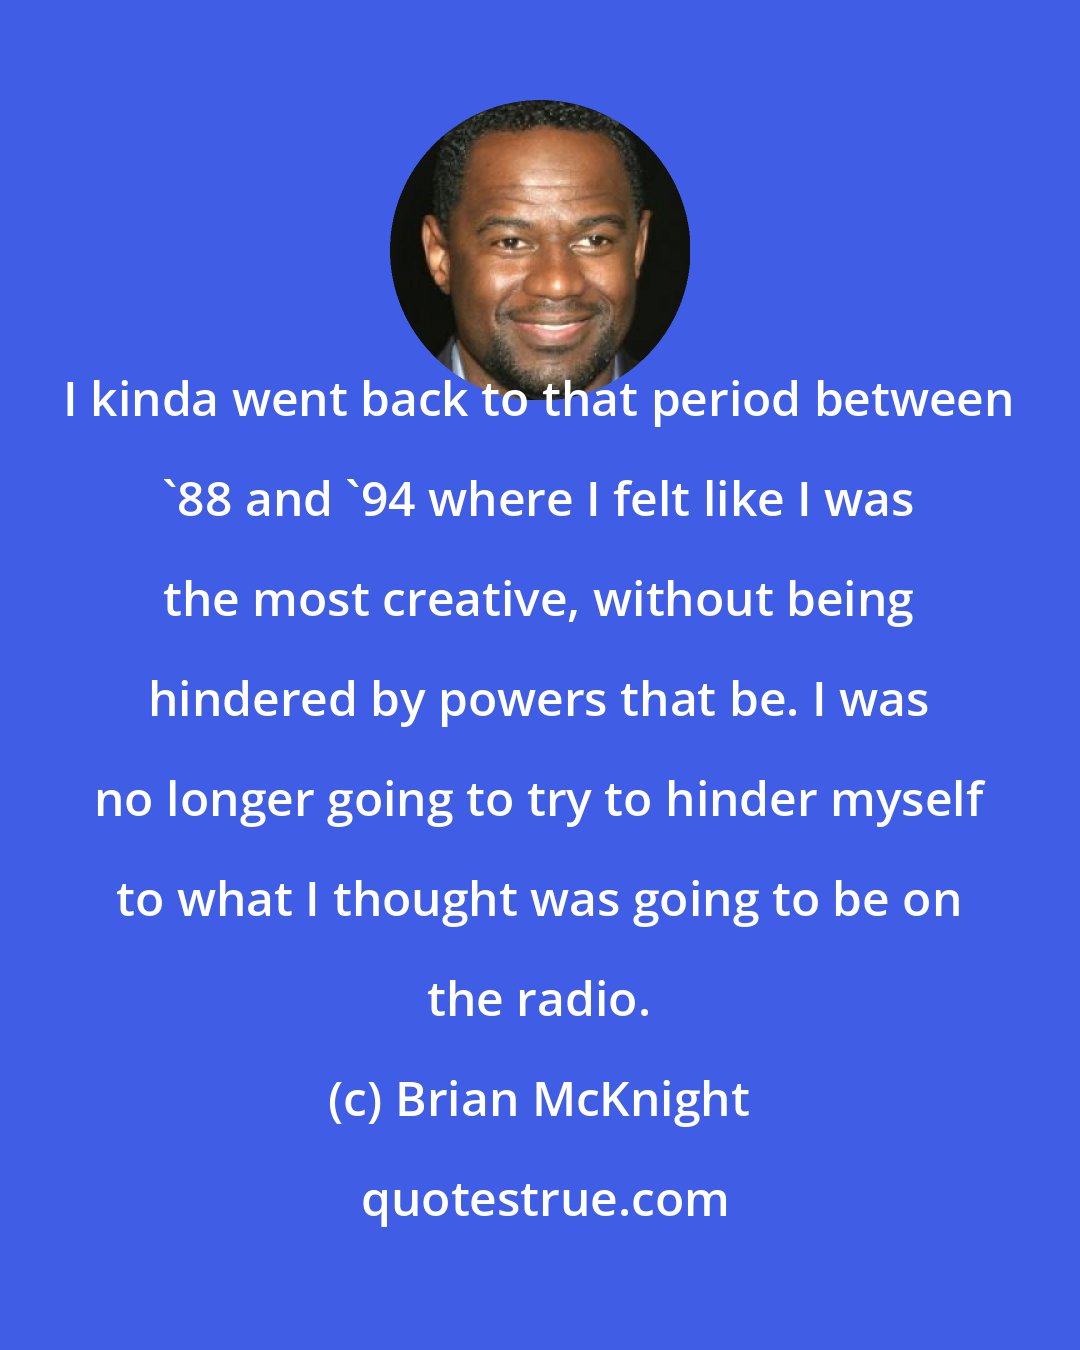 Brian McKnight: I kinda went back to that period between '88 and '94 where I felt like I was the most creative, without being hindered by powers that be. I was no longer going to try to hinder myself to what I thought was going to be on the radio.